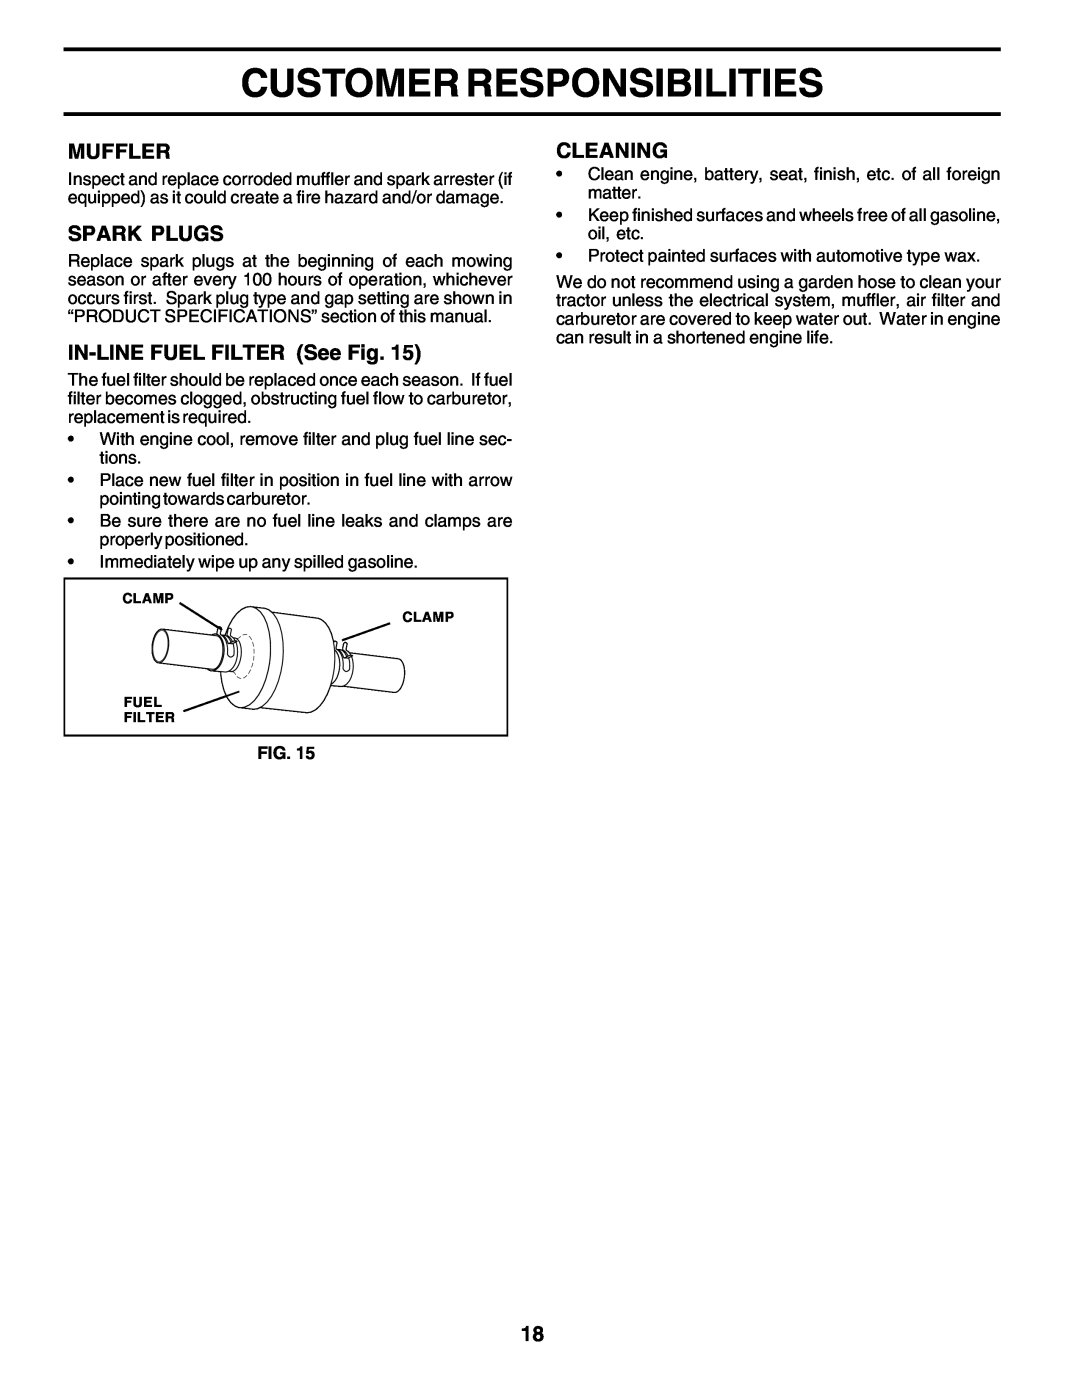 Poulan PC14542D owner manual Customer Responsibilities, Muffler, Spark Plugs, IN-LINEFUEL FILTER See Fig, Cleaning 